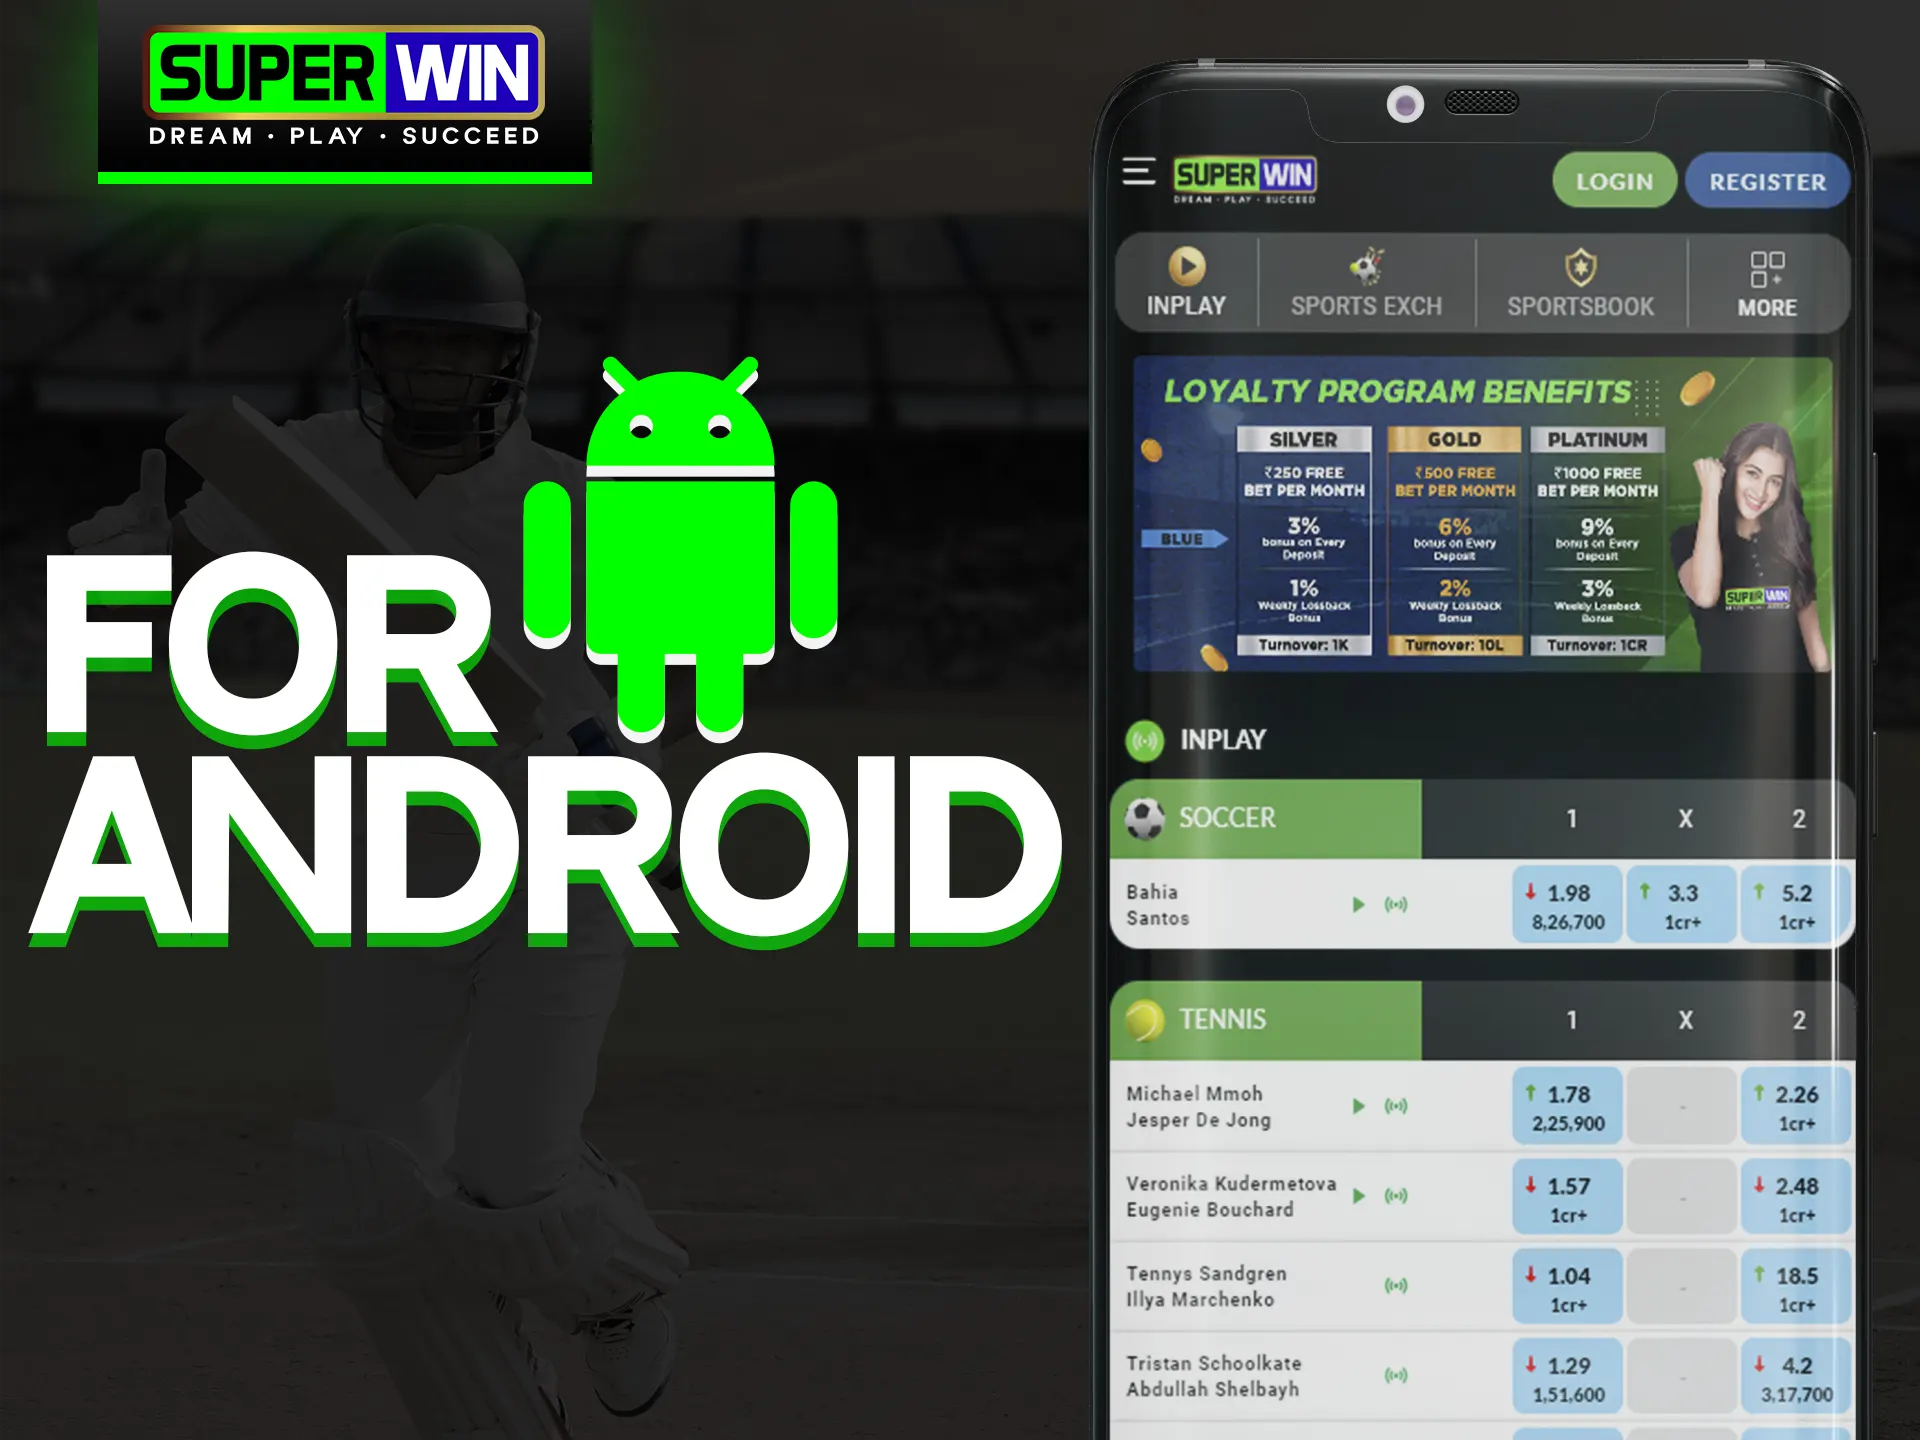 With the Superwin app for Android, play whenever you want.